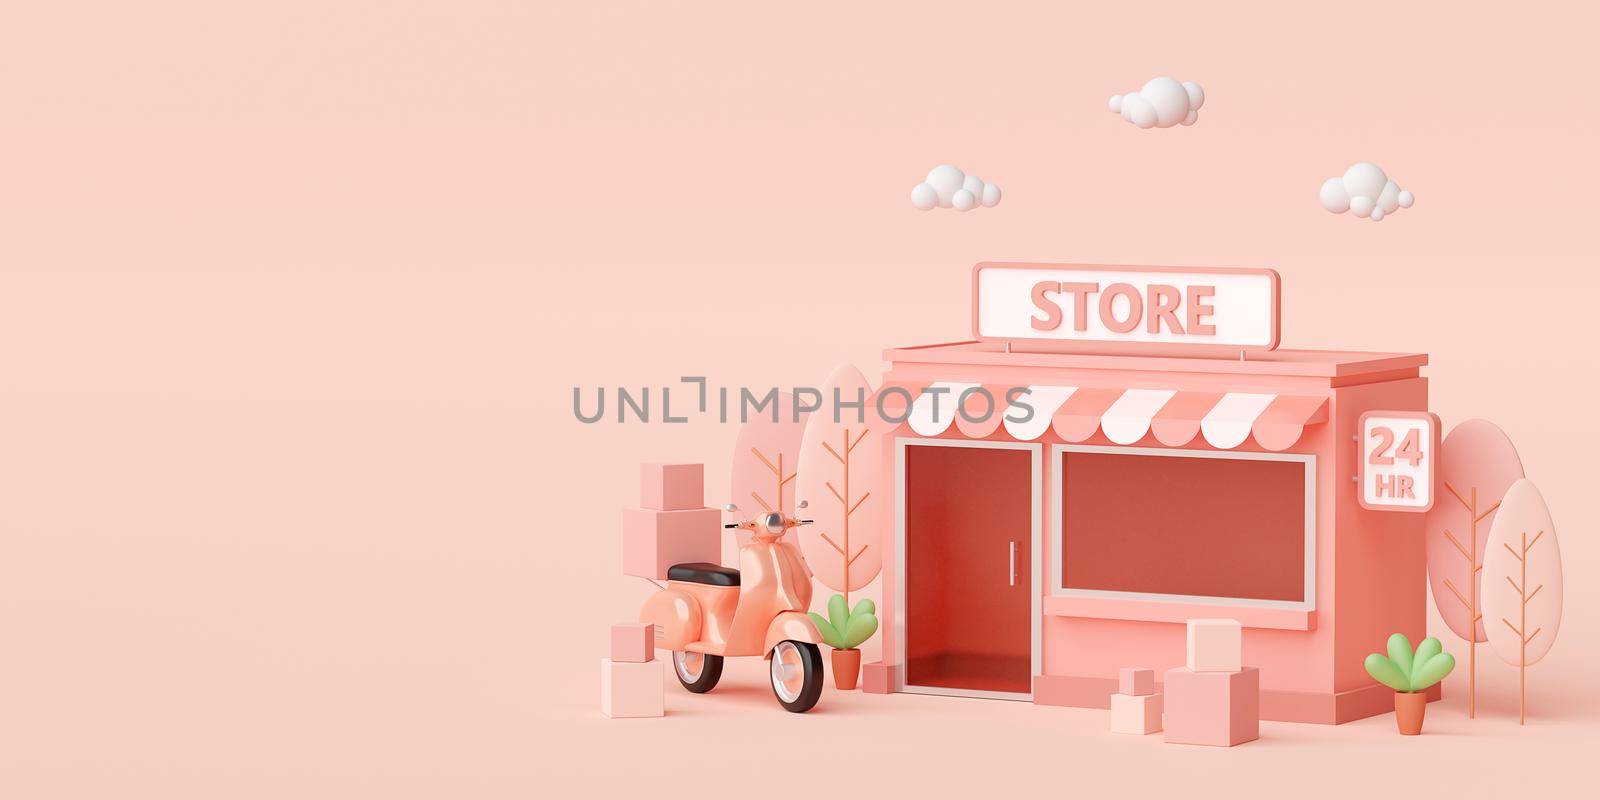 E-commerce concept, Convenience store and delivery service by scooter, 3d illustration by nutzchotwarut